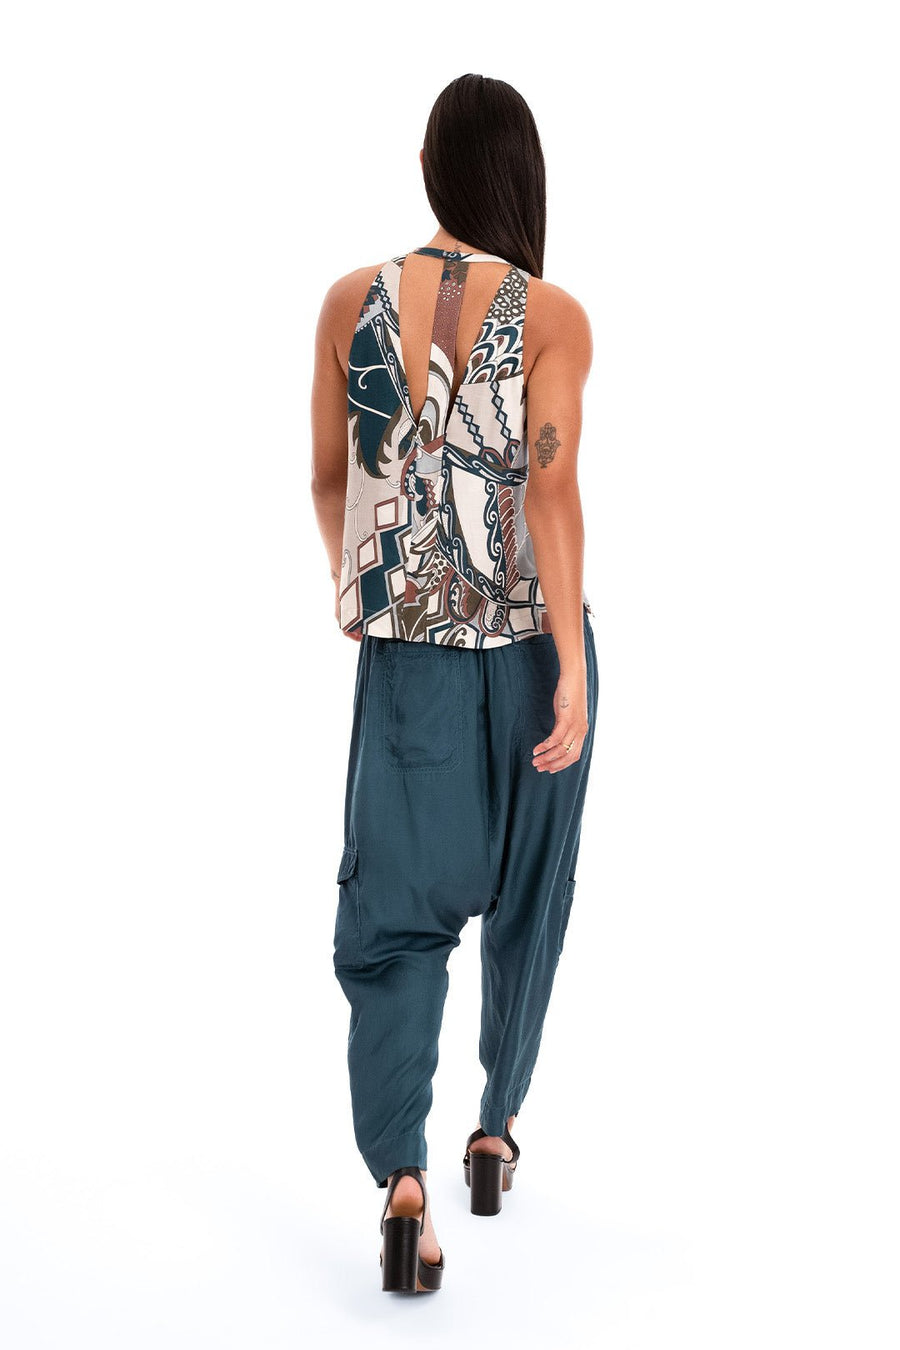 WHITNEY DROP CROTCH PANT, MARINE - Burning Torch Online Boutique